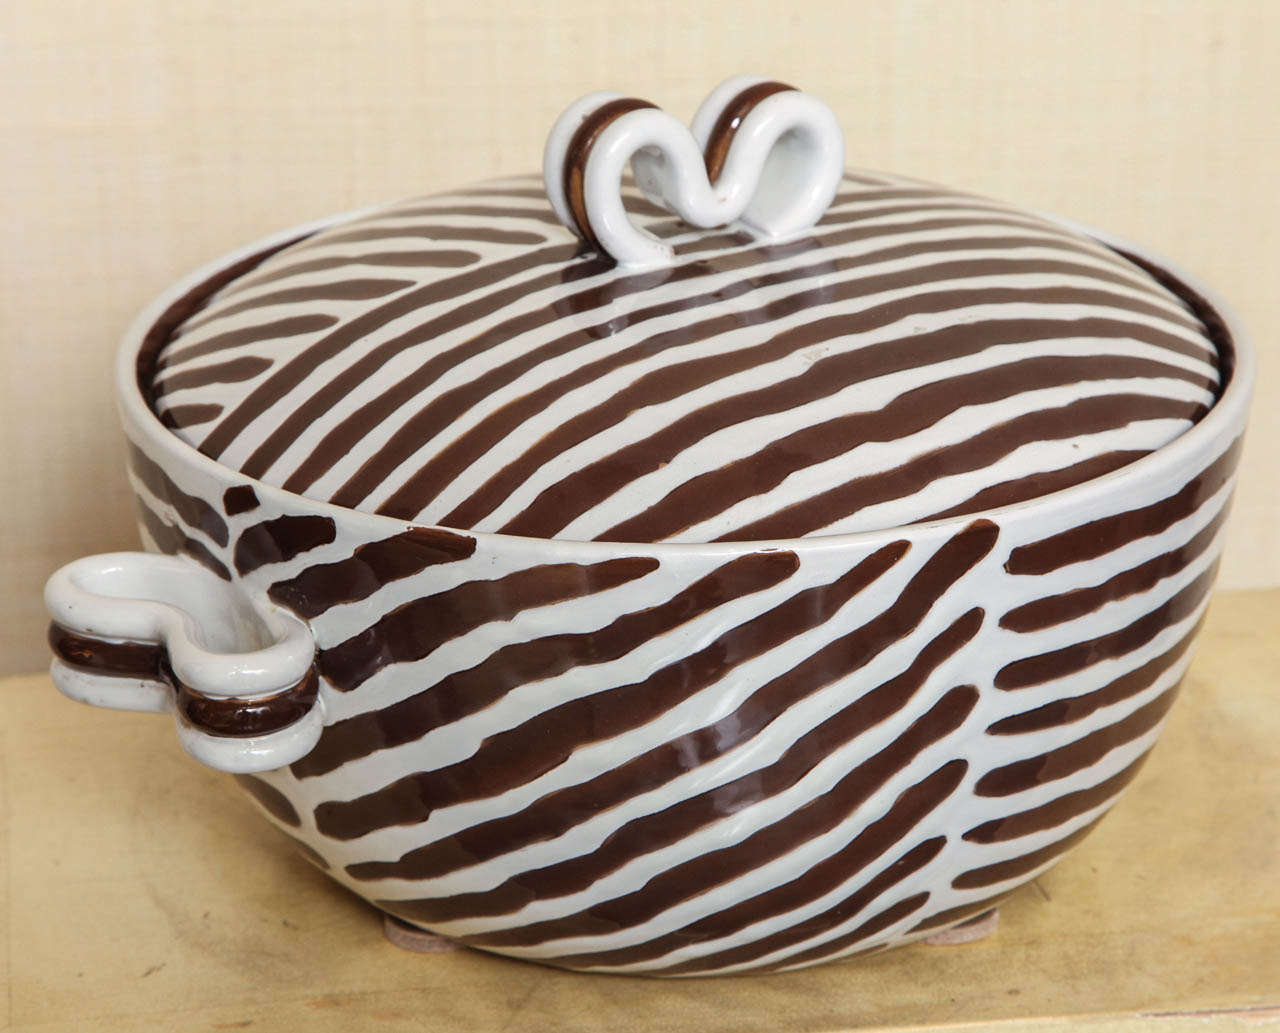 Brown and white hand painted striped casserole dish with lid by Zaccagnini, Italy c. 1954